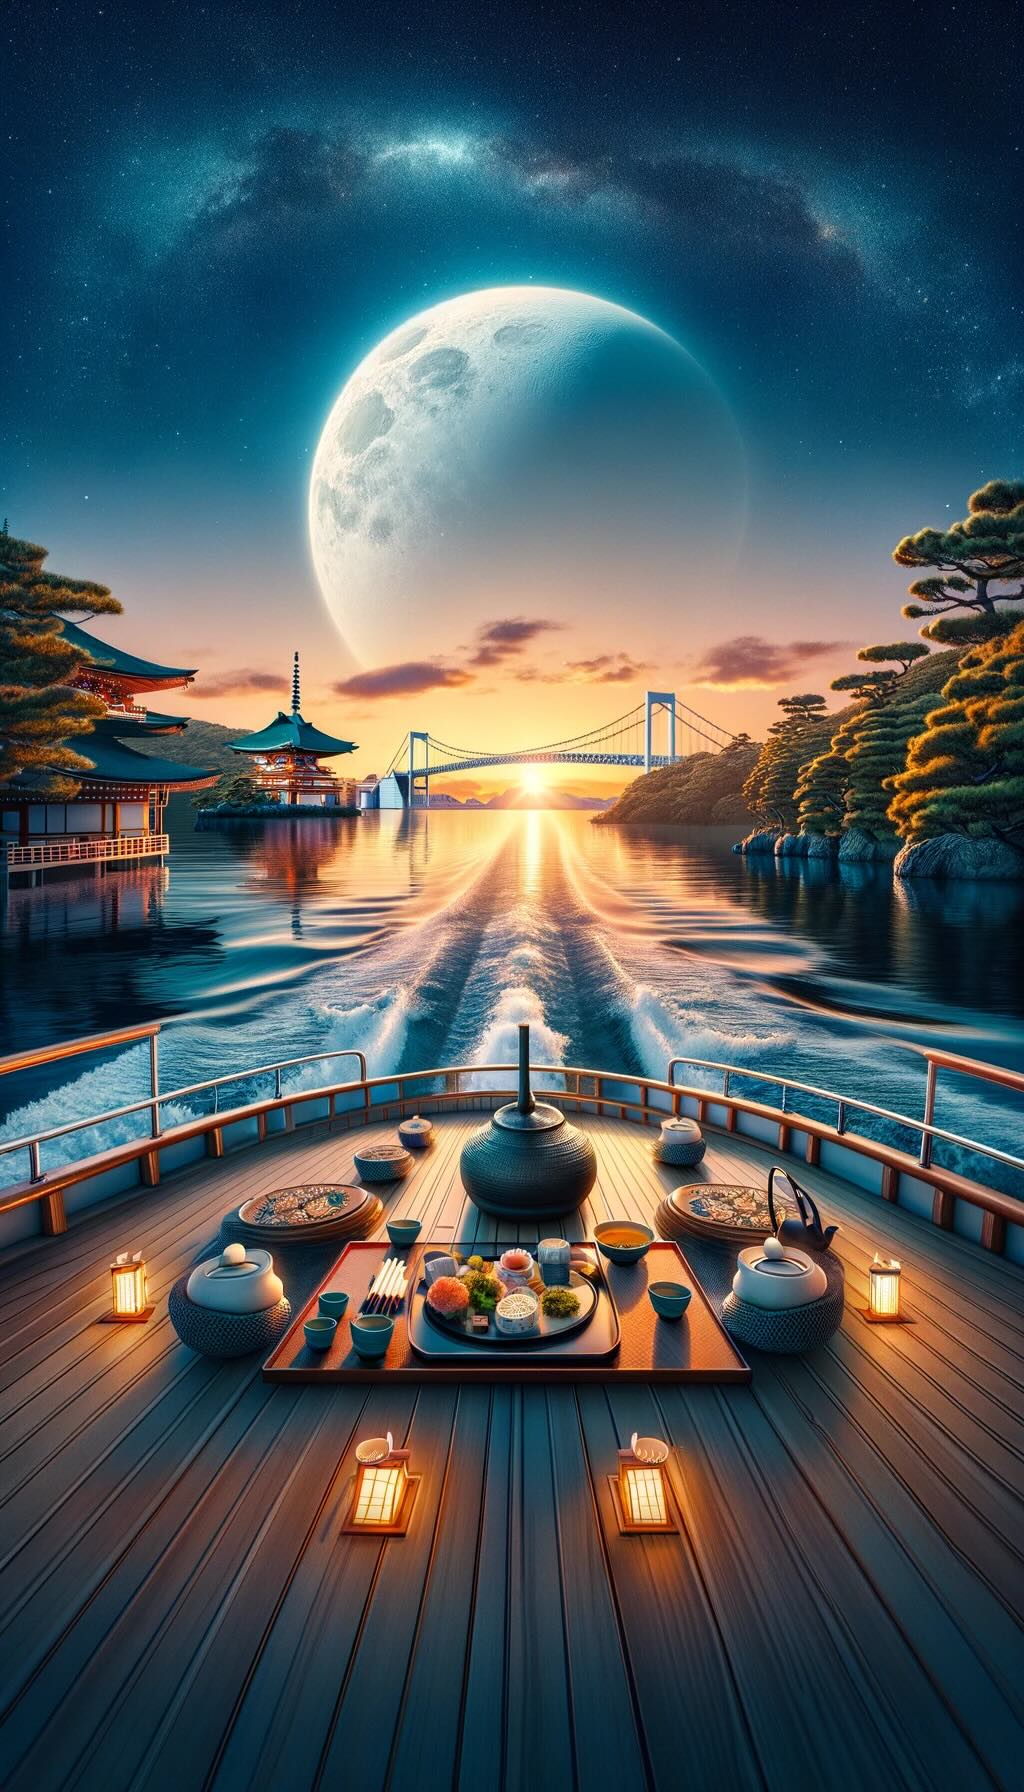 Aunset cruise in Japan, capturing the serene and captivating atmosphere as the sun sets over the water, with elements of traditional Japanese culture enhancing the experience